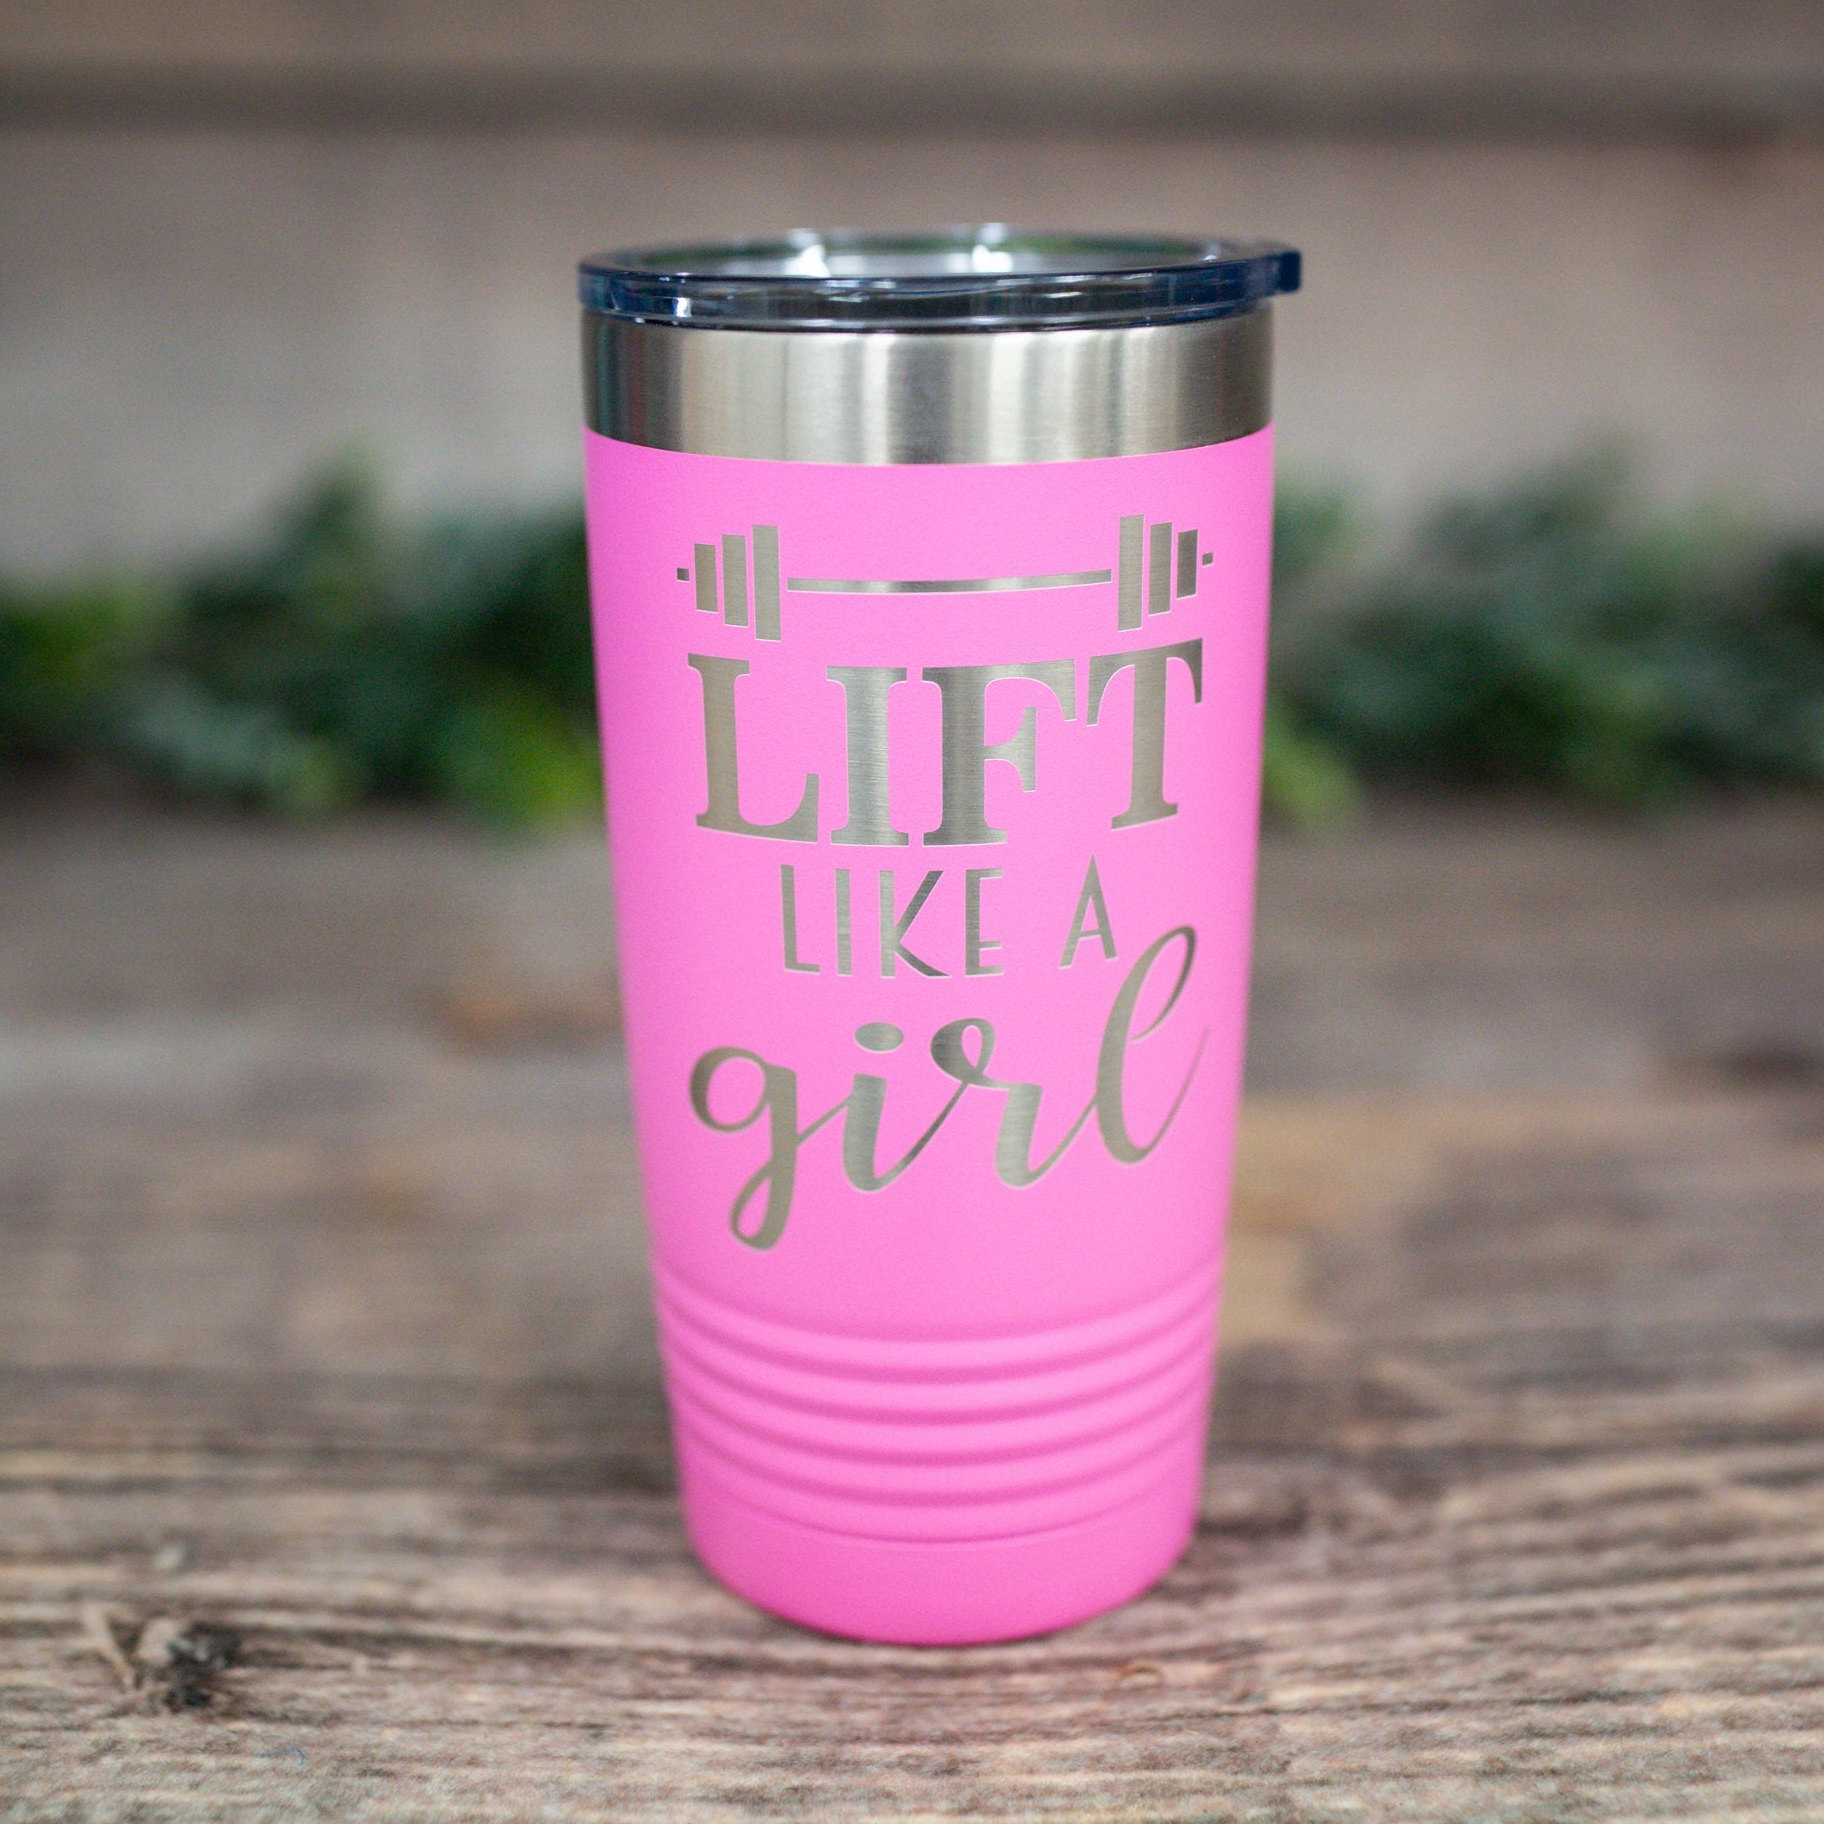 https://3cetching.com/wp-content/uploads/2021/07/lift-like-a-girl-engraved-stainless-steel-tumbler-weight-lifting-travel-mug-crossfit-lover-gift-60f72e67.jpg